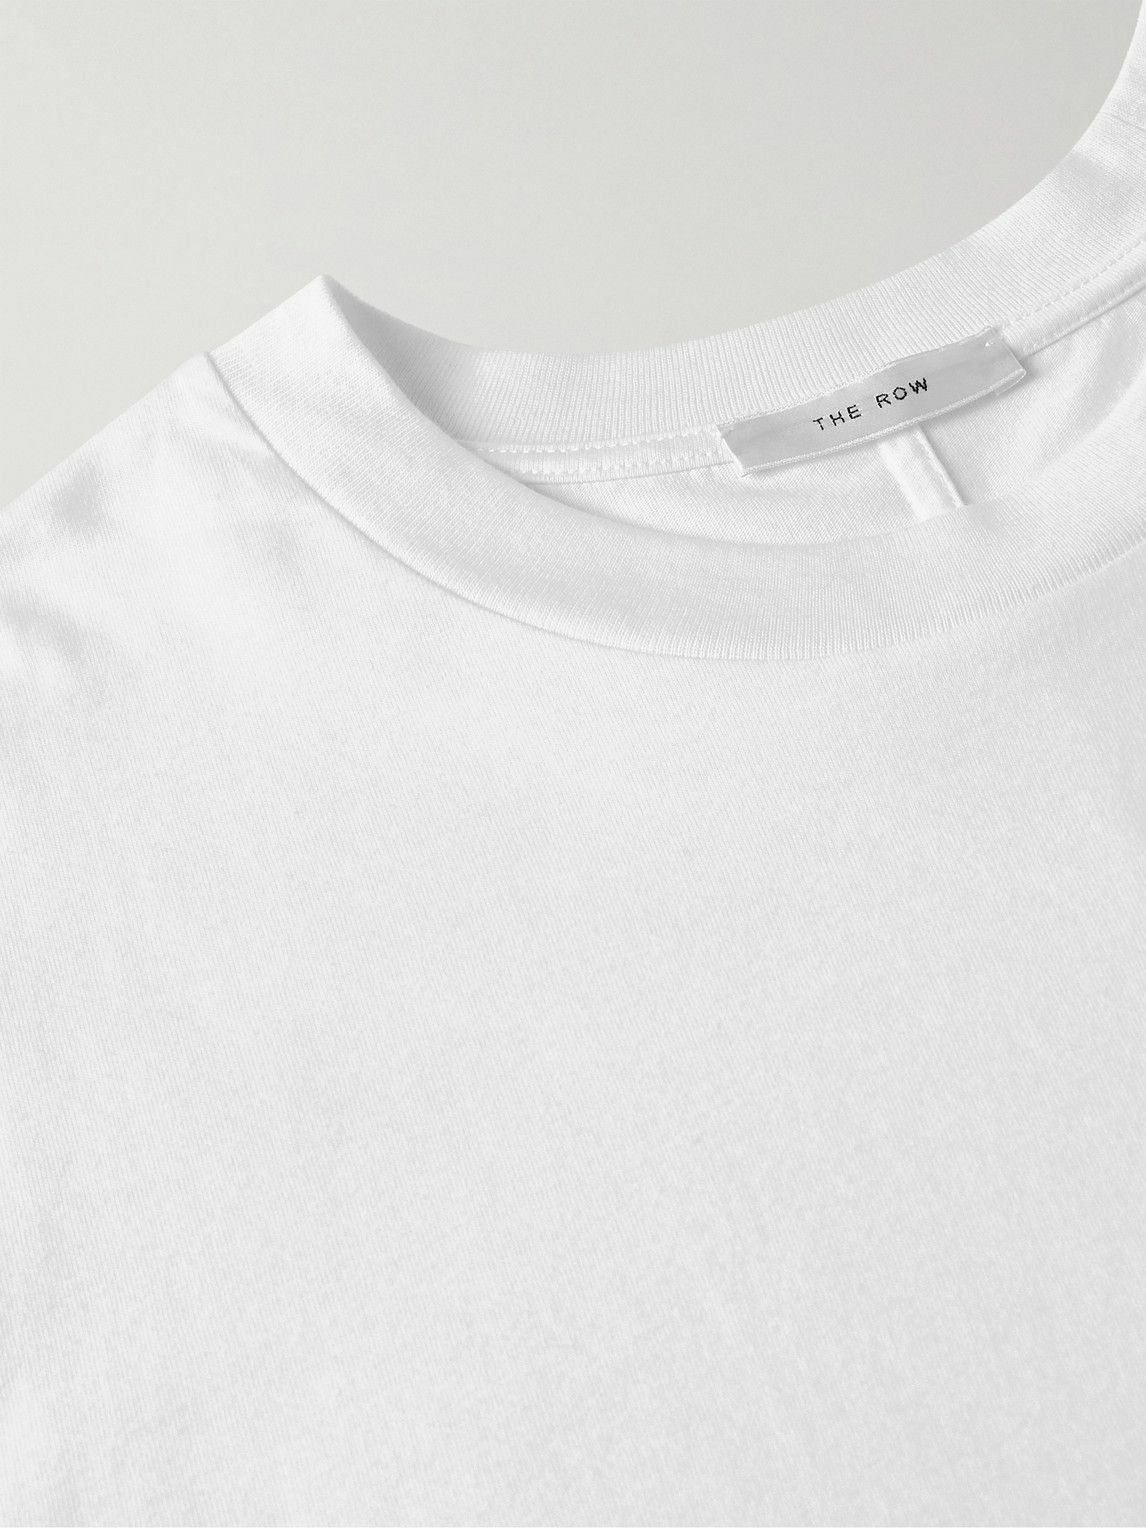 The Row - Nilson Cotton-Jersey T-Shirt - White The Row